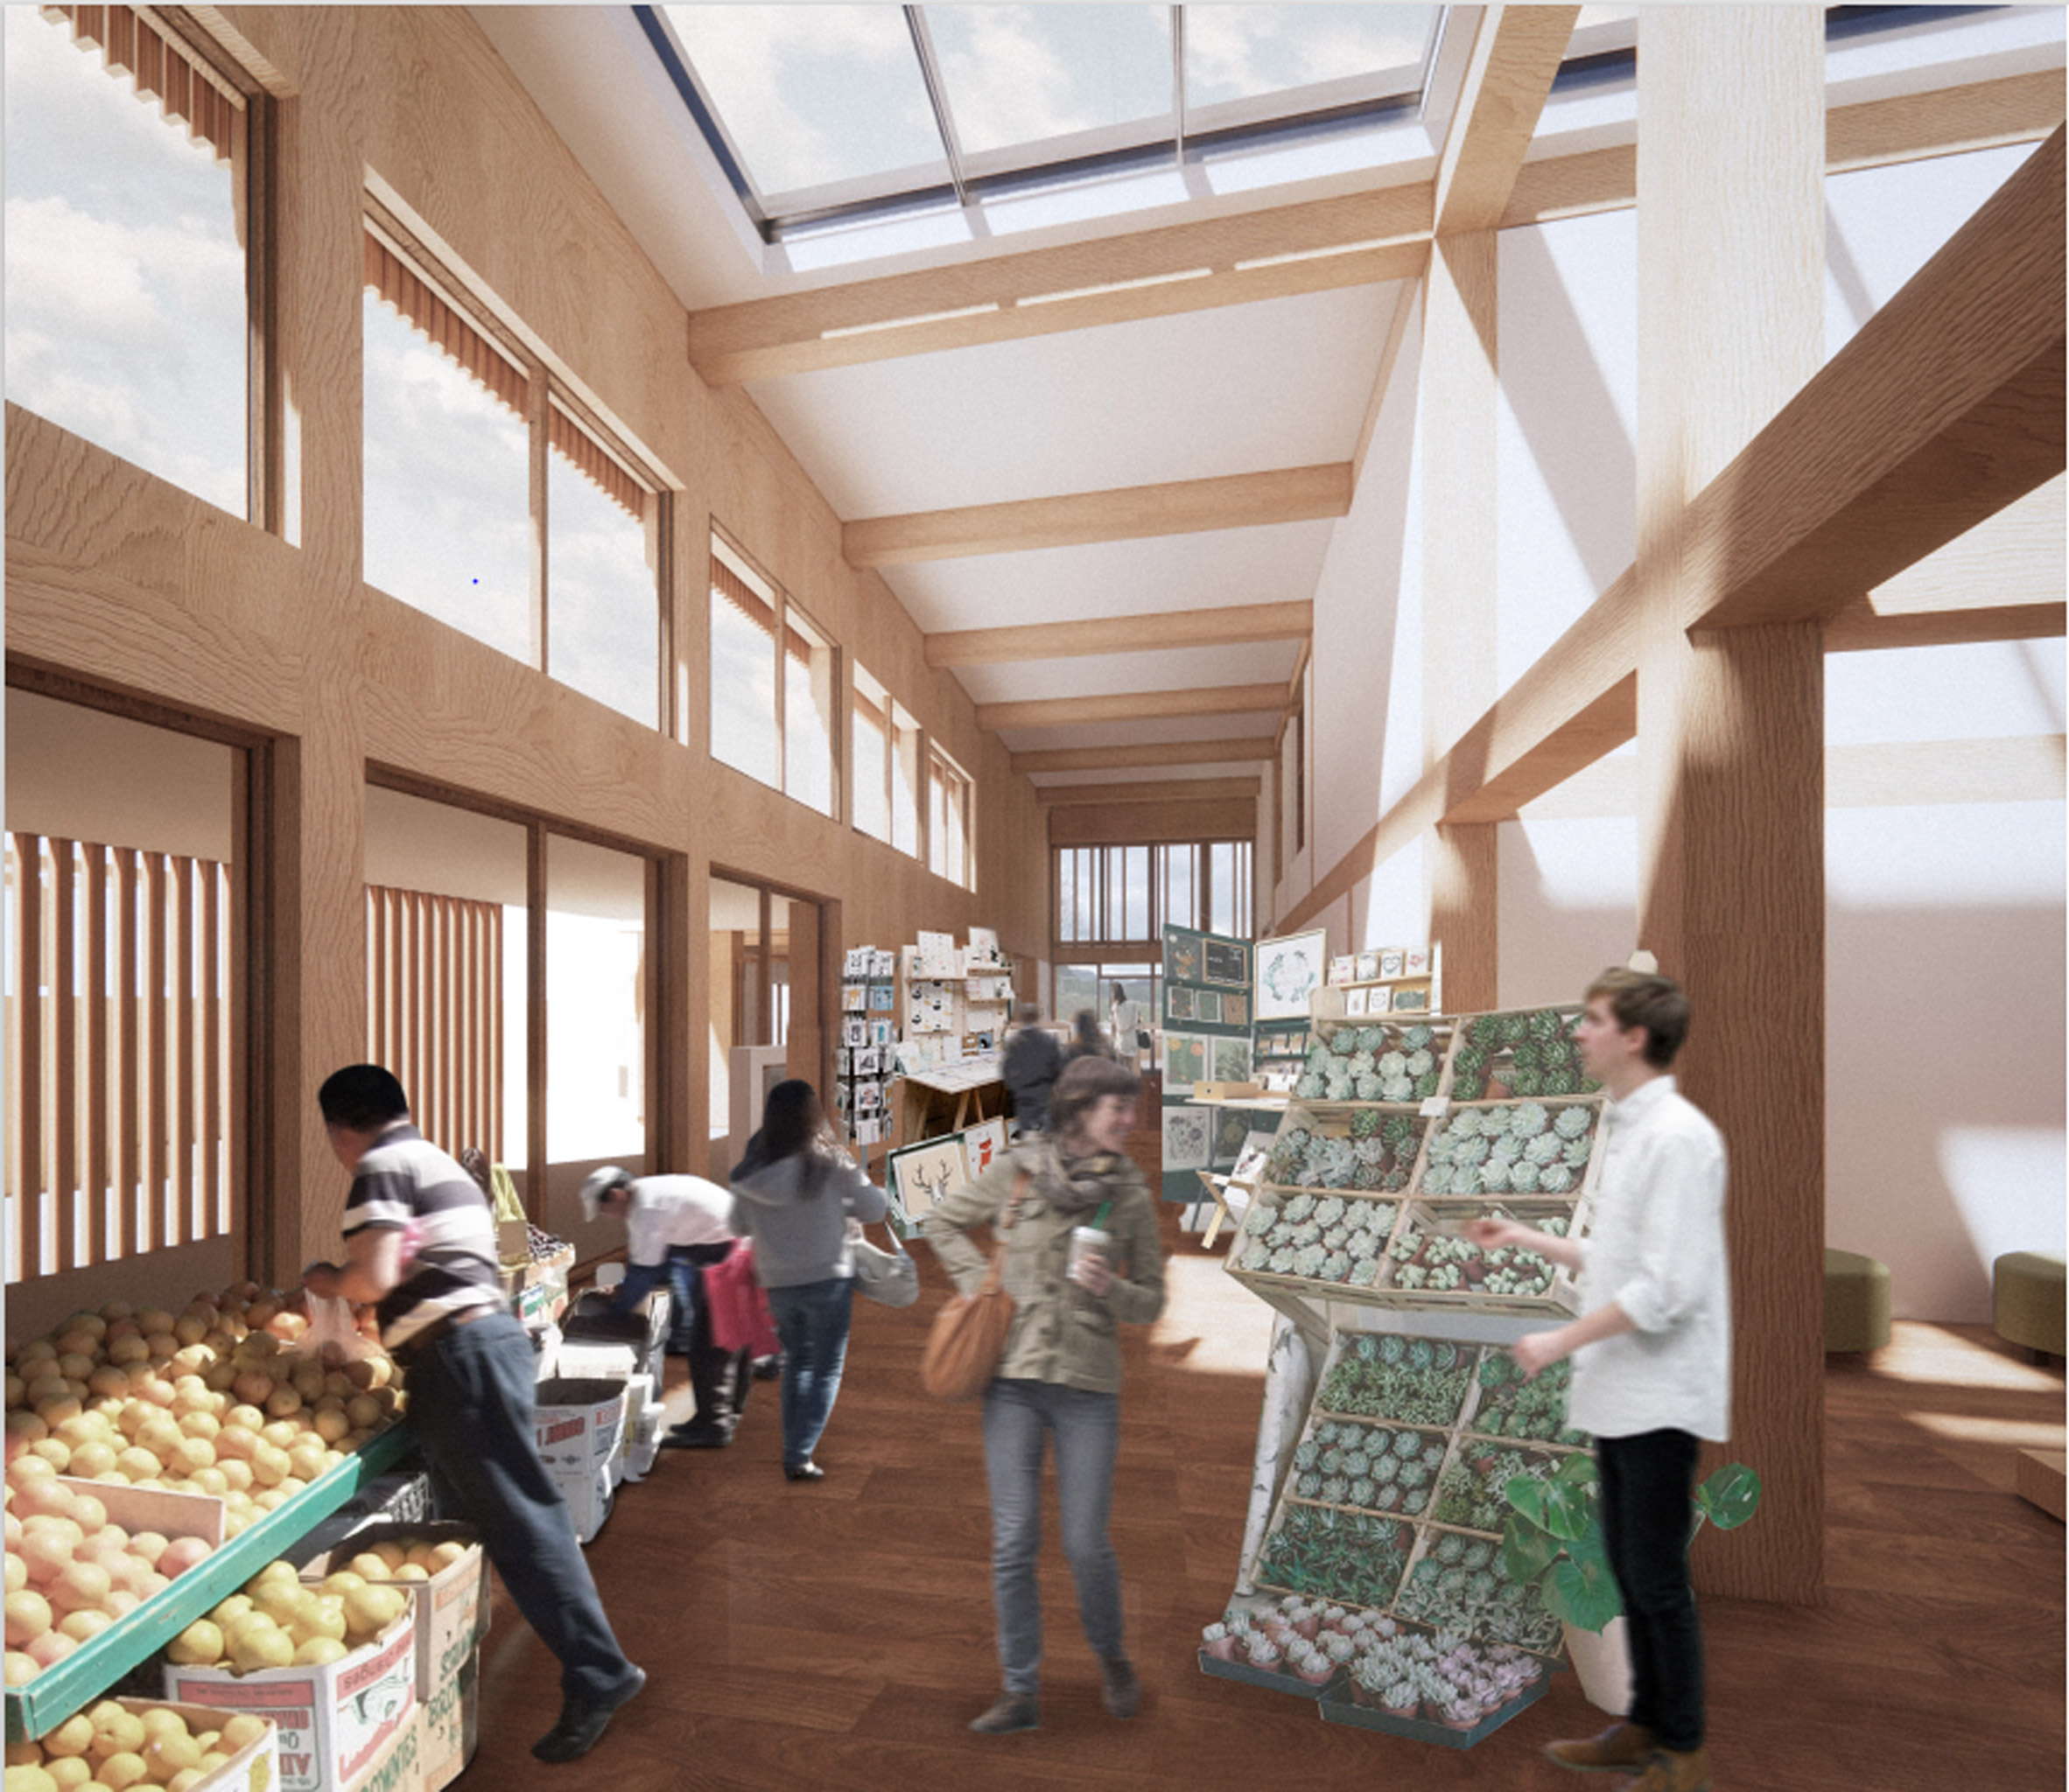 Interior render of a timber space with food stands